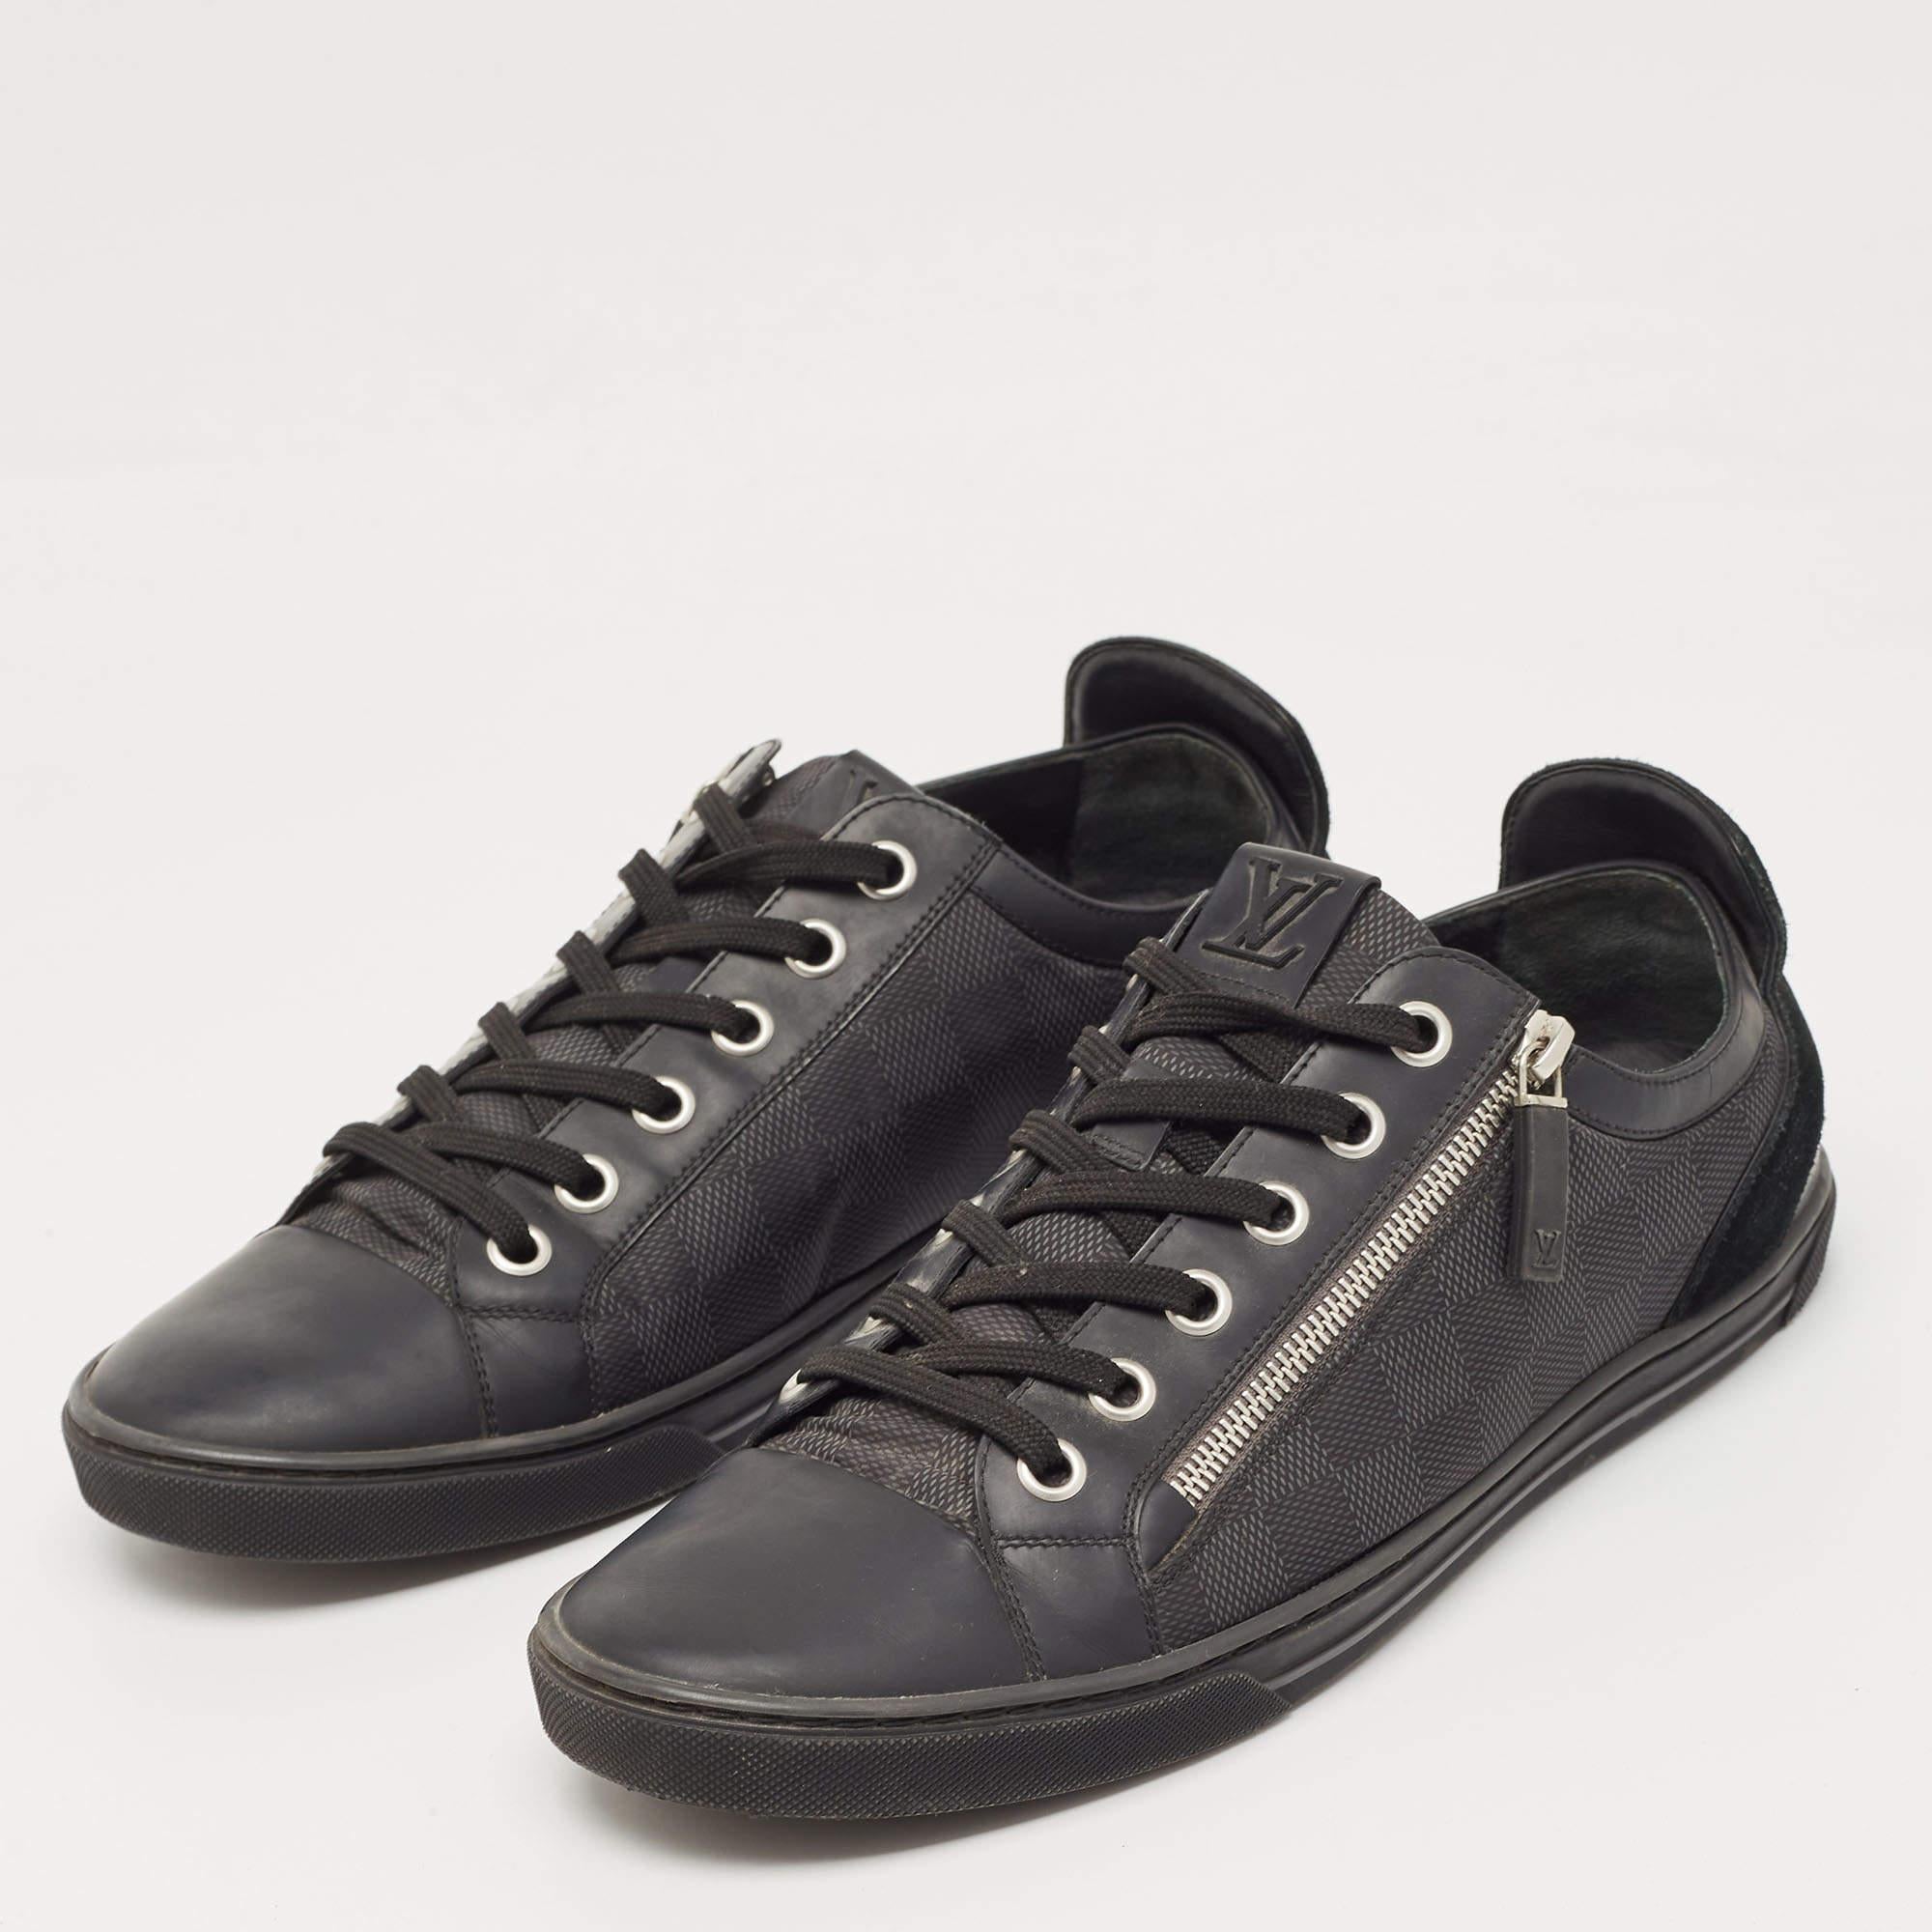 Give your outfit a luxe update with this pair of LV sneakers. The shoes are sewn perfectly to help you make a statement in them for a long time.

